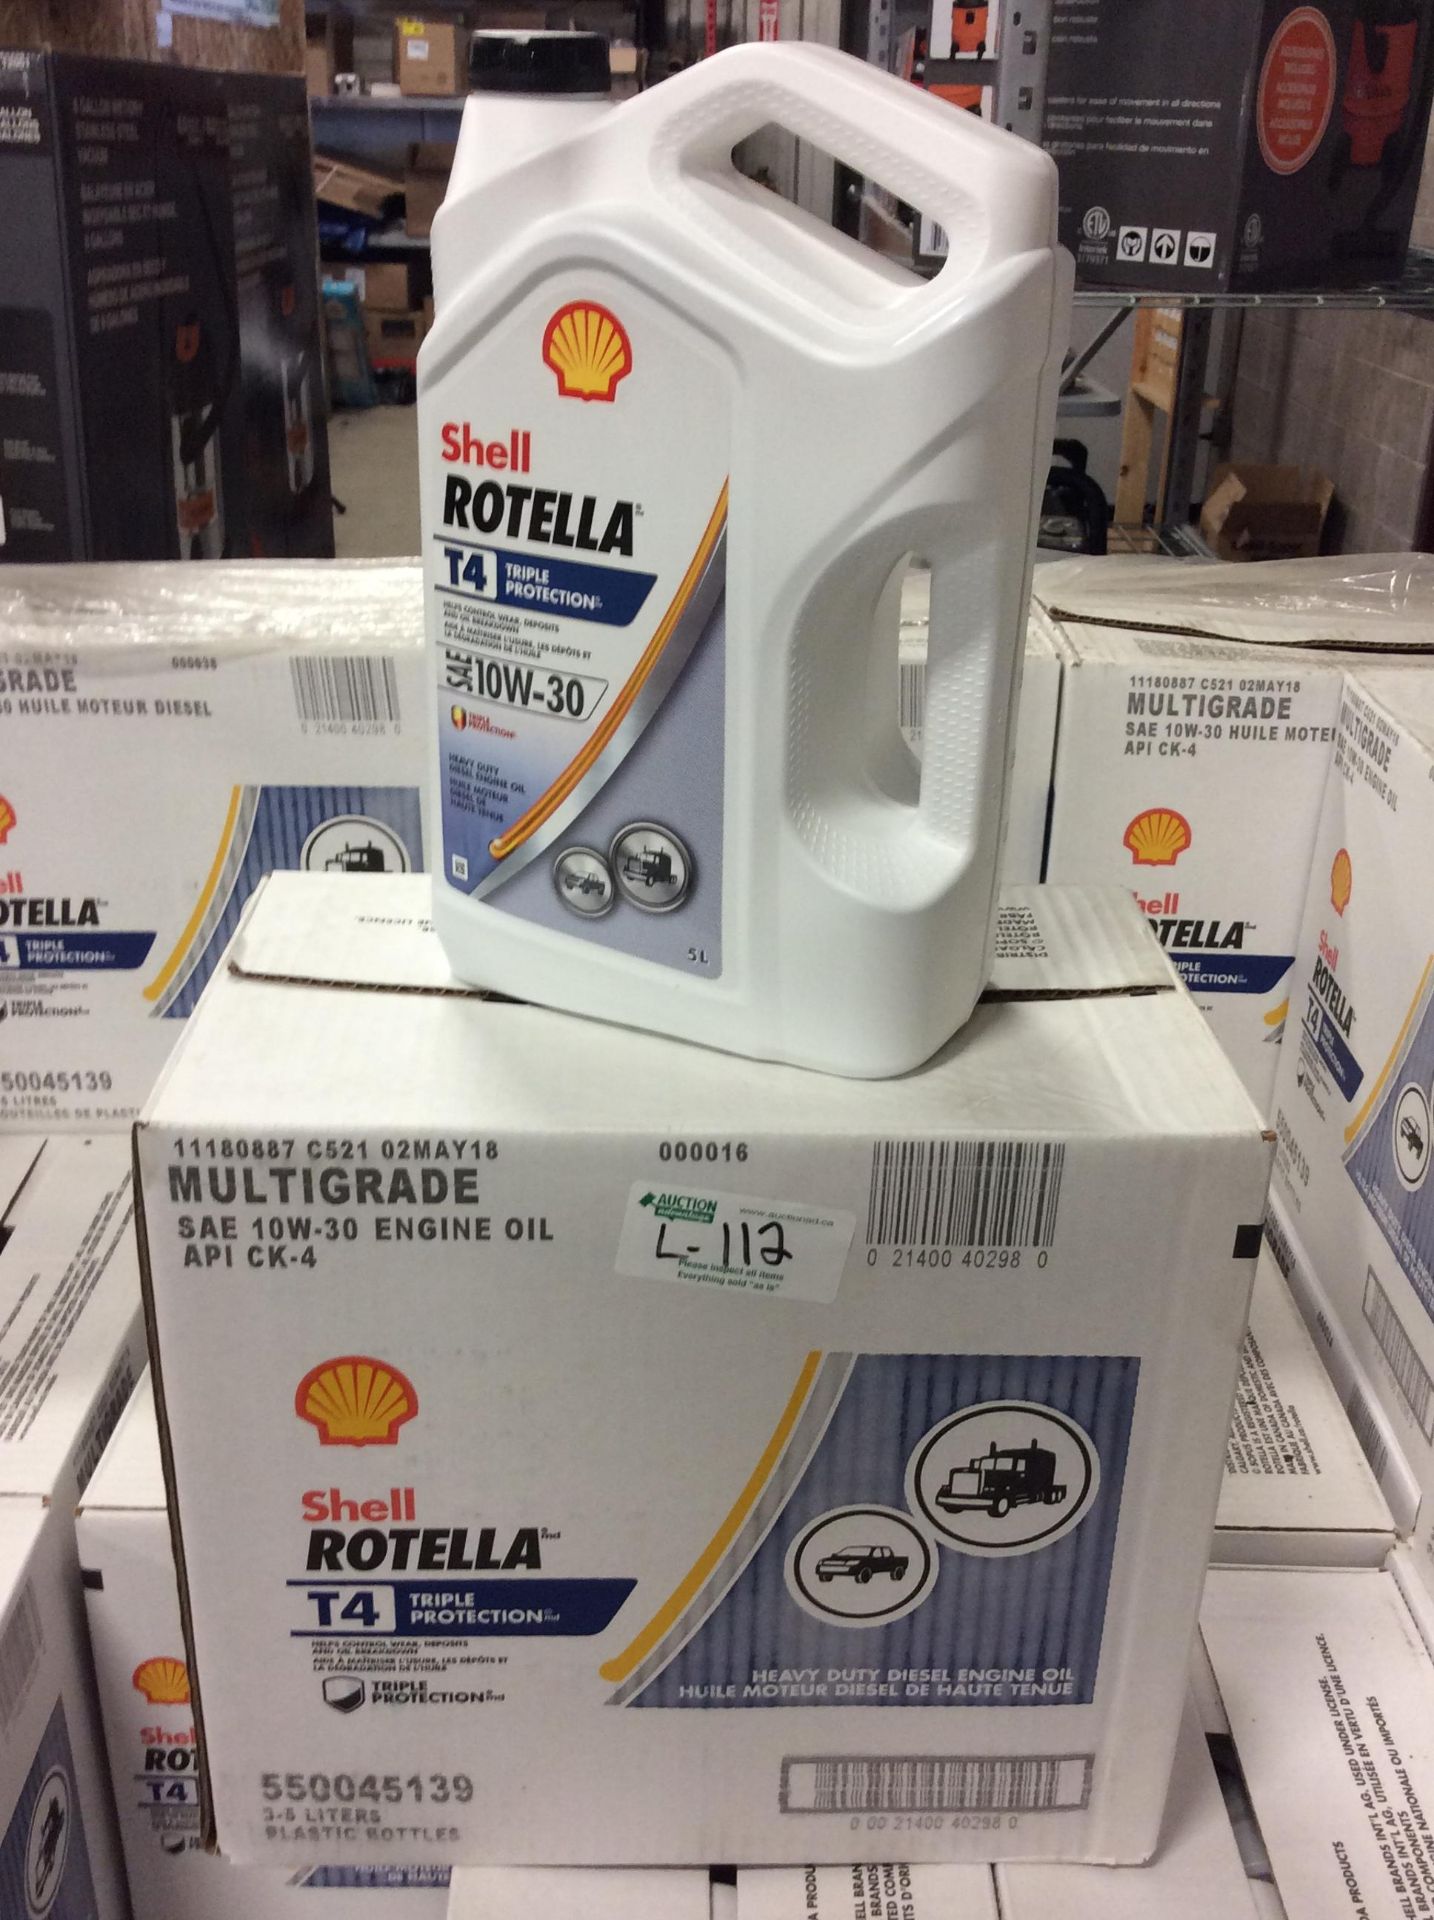 Shell Rotella 10w30 Motor Oil (3 X 5 litre) (47 available)